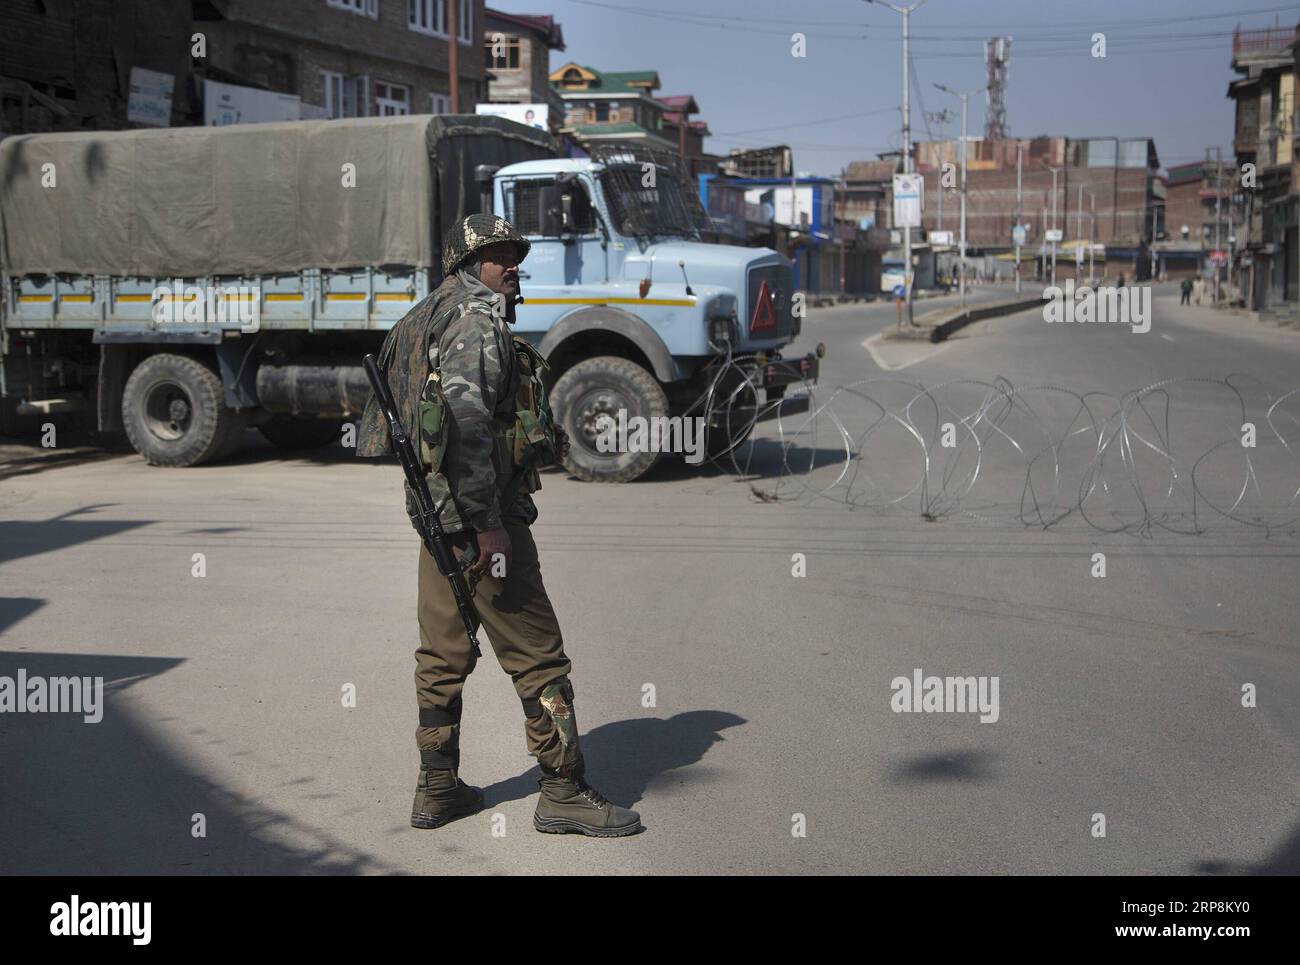 (190310) -- SRINAGAR, March 10, 2019 (Xinhua) -- An Indian paramilitary soldier stands guard near barbed wire barricade during a security lockdown in downtown area of Srinagar, the summer capital of Indian-controlled Kashmir, March 10, 2019. Authorities on Sunday imposed restrictions in parts of Srinagar city to prevent protests after India s anti-terror agency, National Investigation Agency (NIA), summoned key separatist leader and chief cleric of Indian-controlled Kashmir for questioning in an alleged funding case, officials said on Saturday. Mirwaiz Umar Farooq has been asked to appear befo Stock Photo